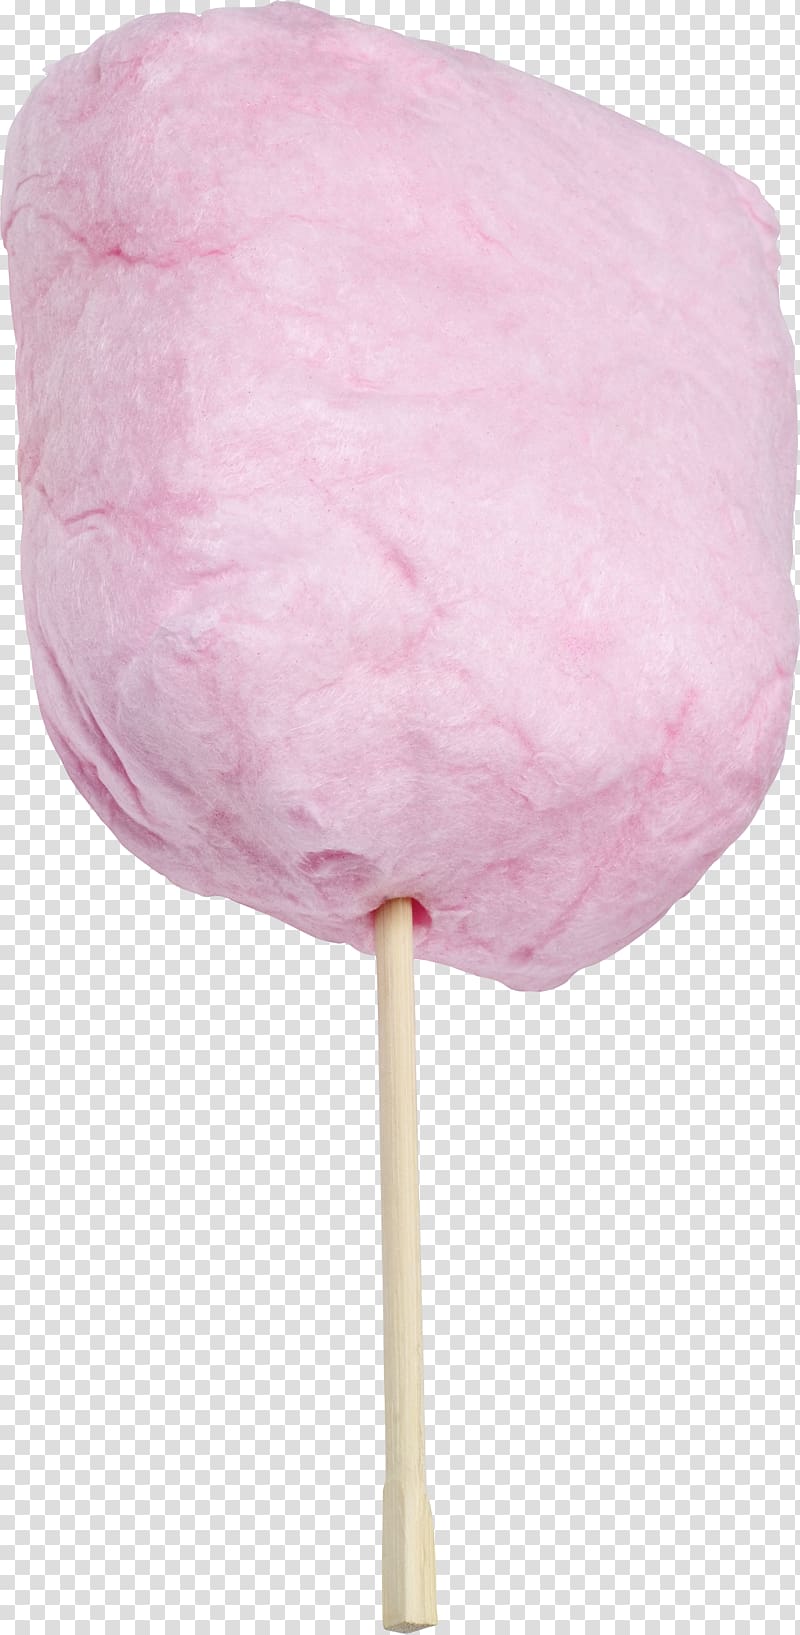 Cotton candy Food Sugar Sweetness, candy transparent background PNG clipart